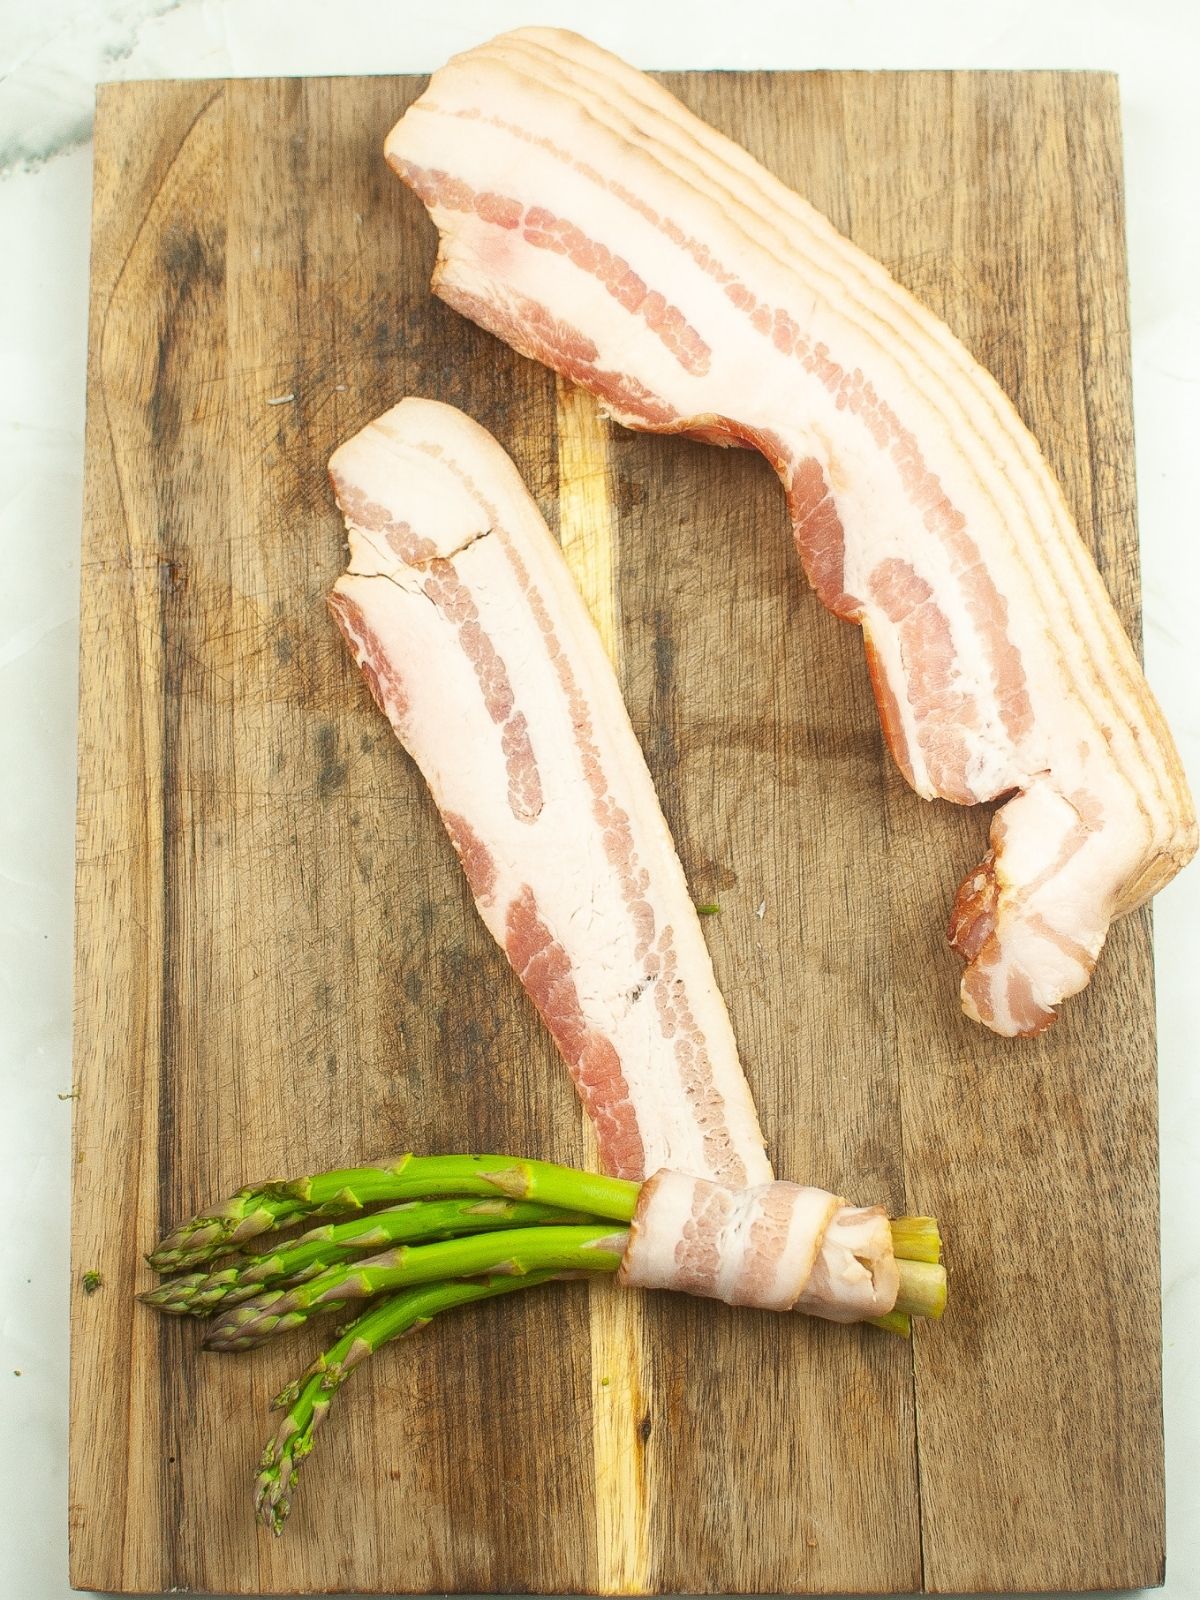 wrapping a bunch of asparagus in bacon.